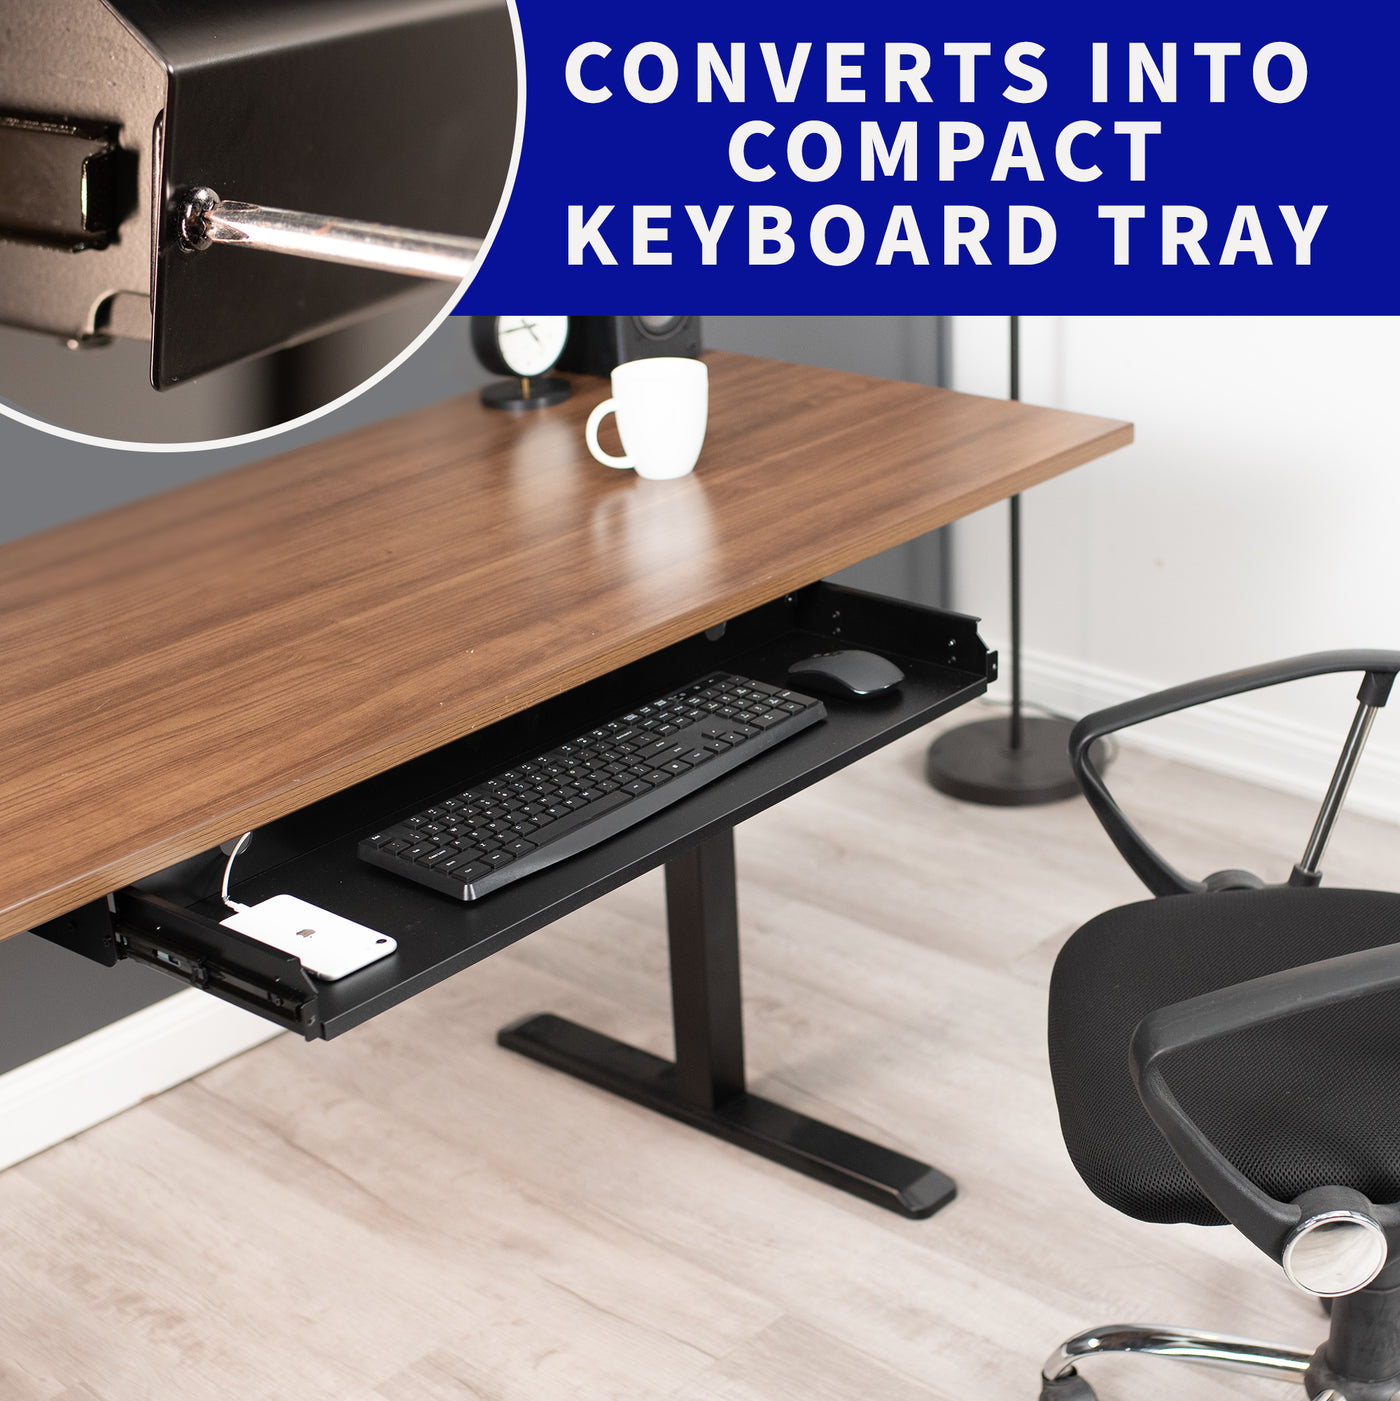 Convert into a compact keyboard tray.